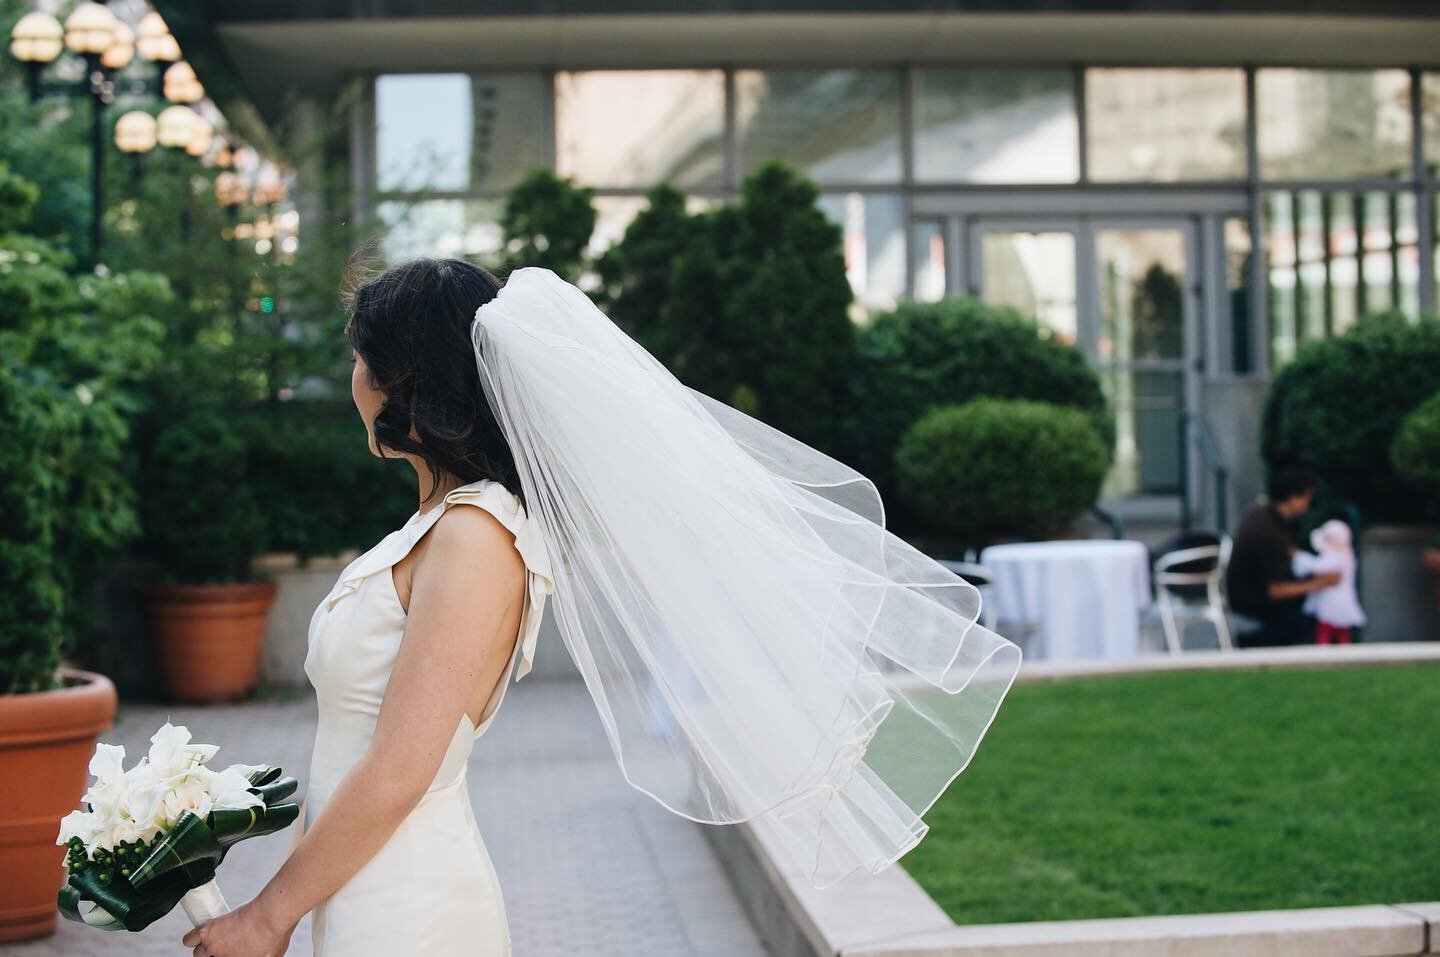 A whimsical moment at Susan and Rich&rsquo;s NYC wedding. #nycwedding #windintheveil #catchingamoment